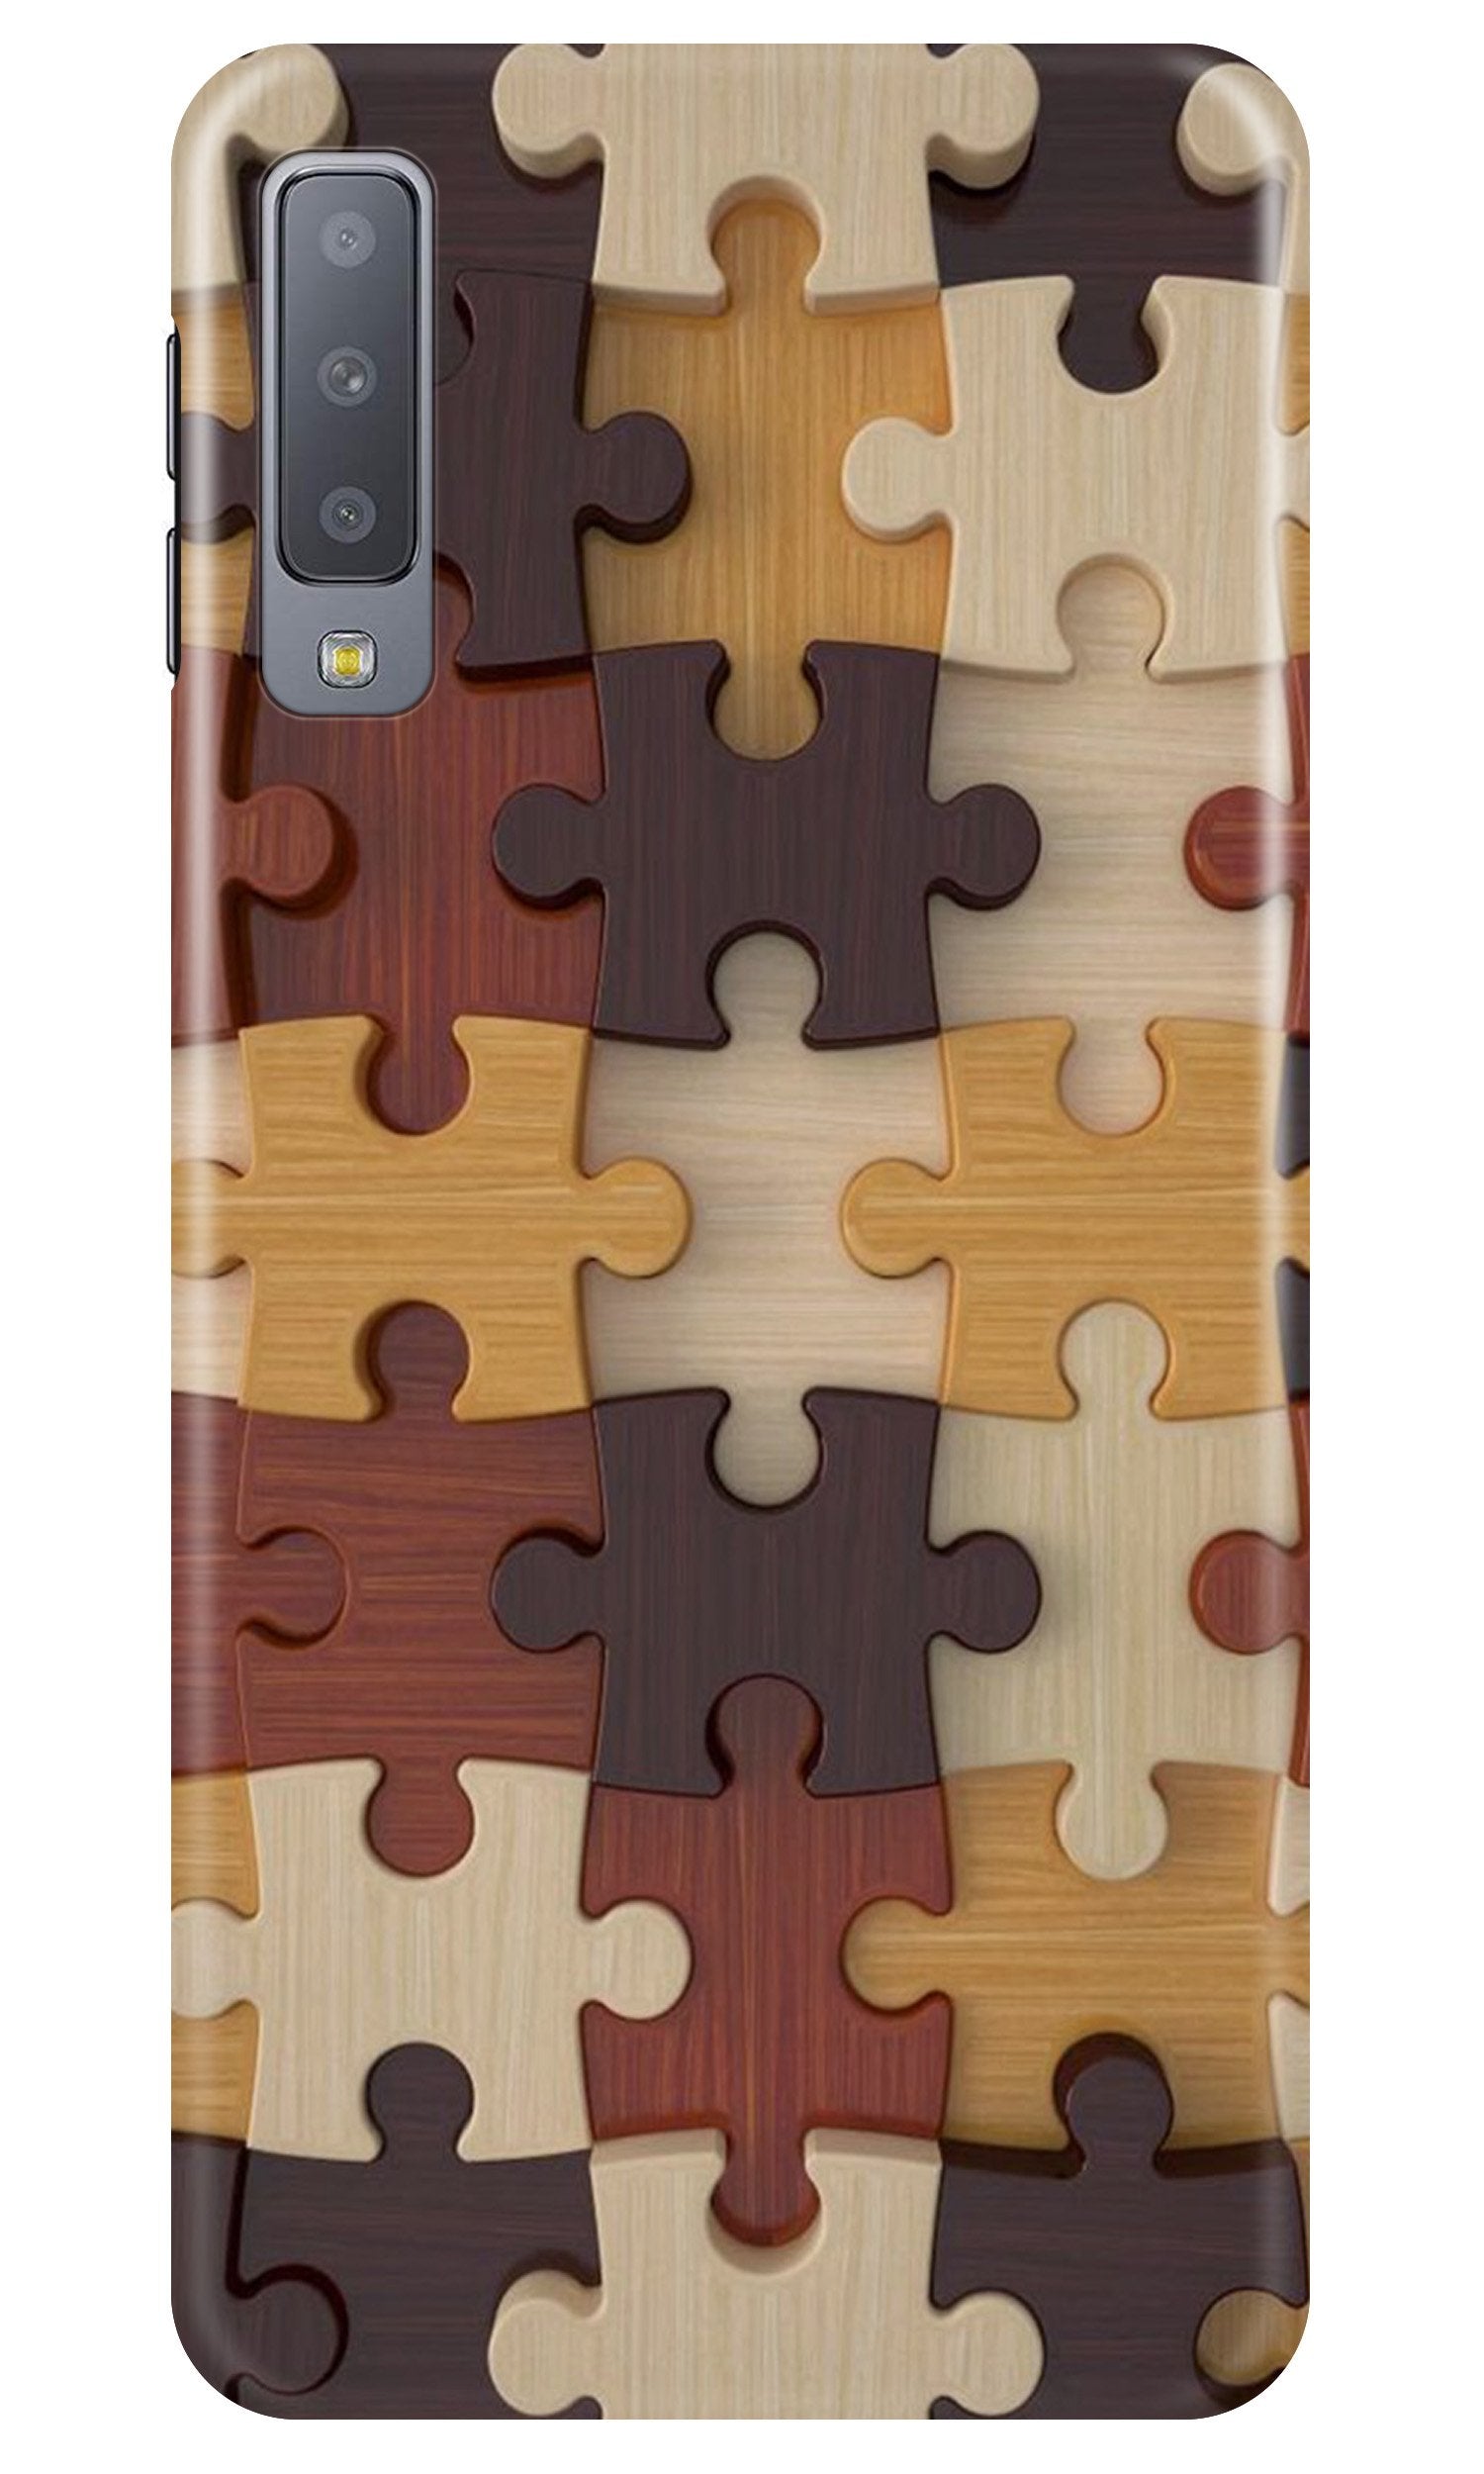 Puzzle Pattern Case for Samsung Galaxy A70 (Design No. 217)